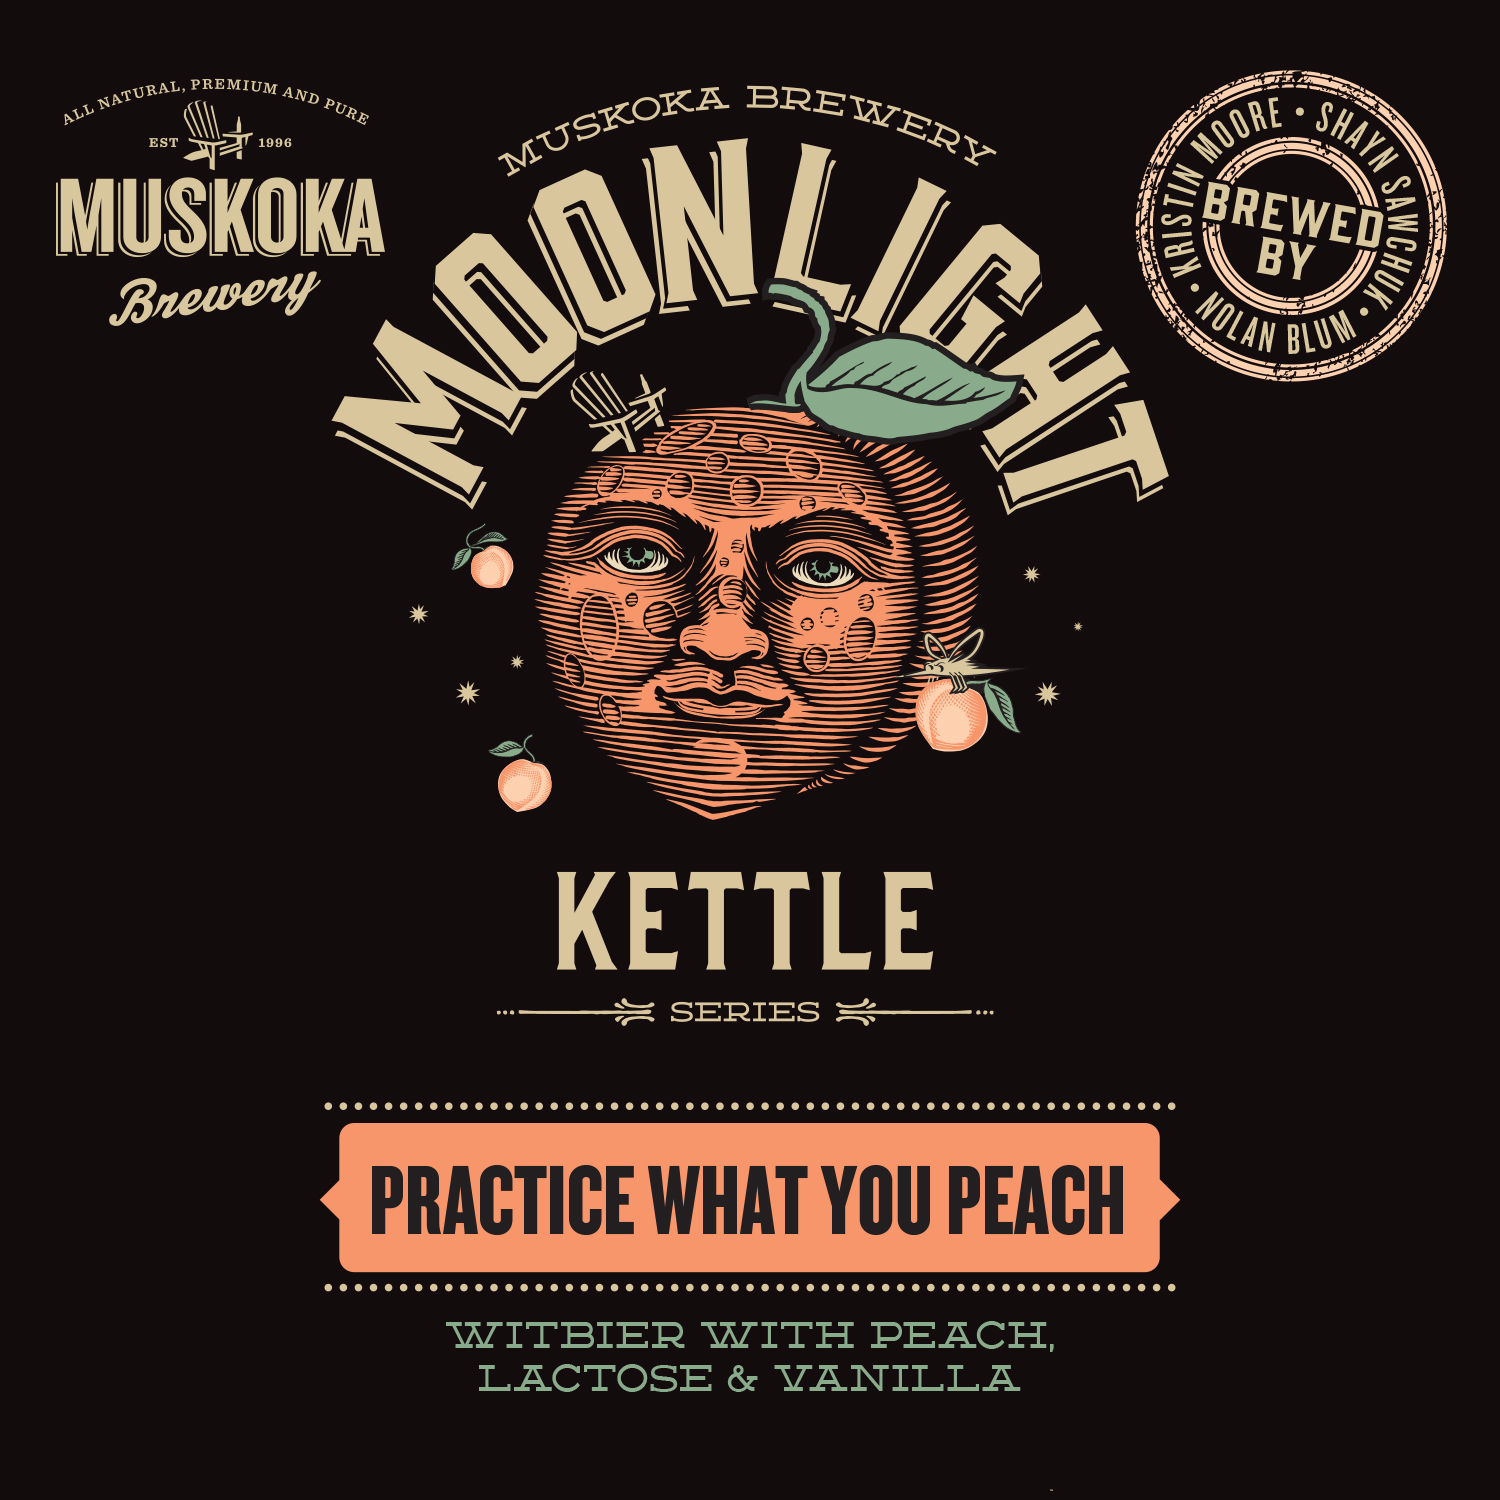 Practice What You Peach Witbier with Peach, Lactose & Vanilla.